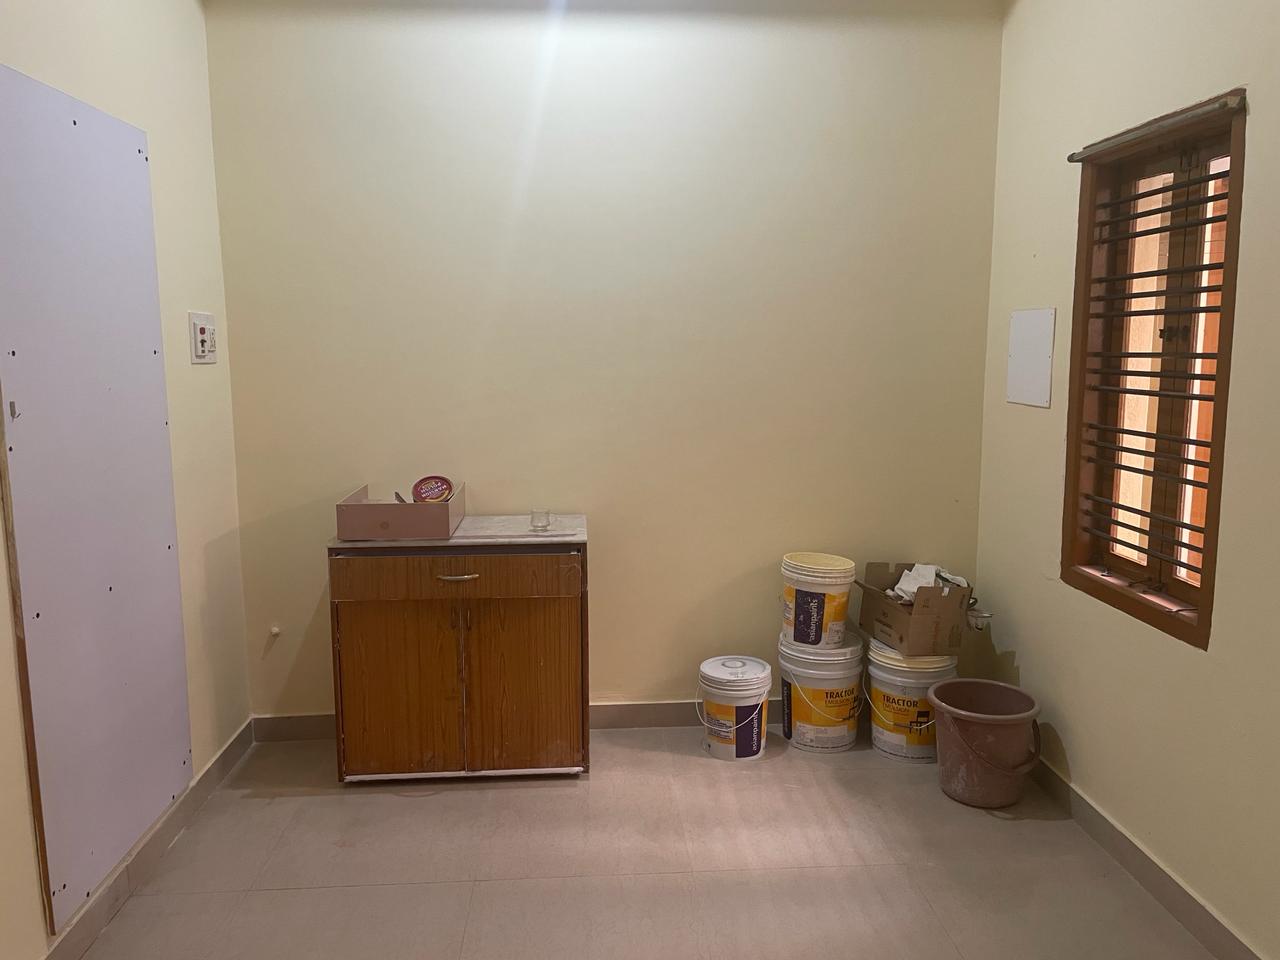 2 BHK Independent House for Lease Only at JAML2 - 3400 in Ganapathi Nagar